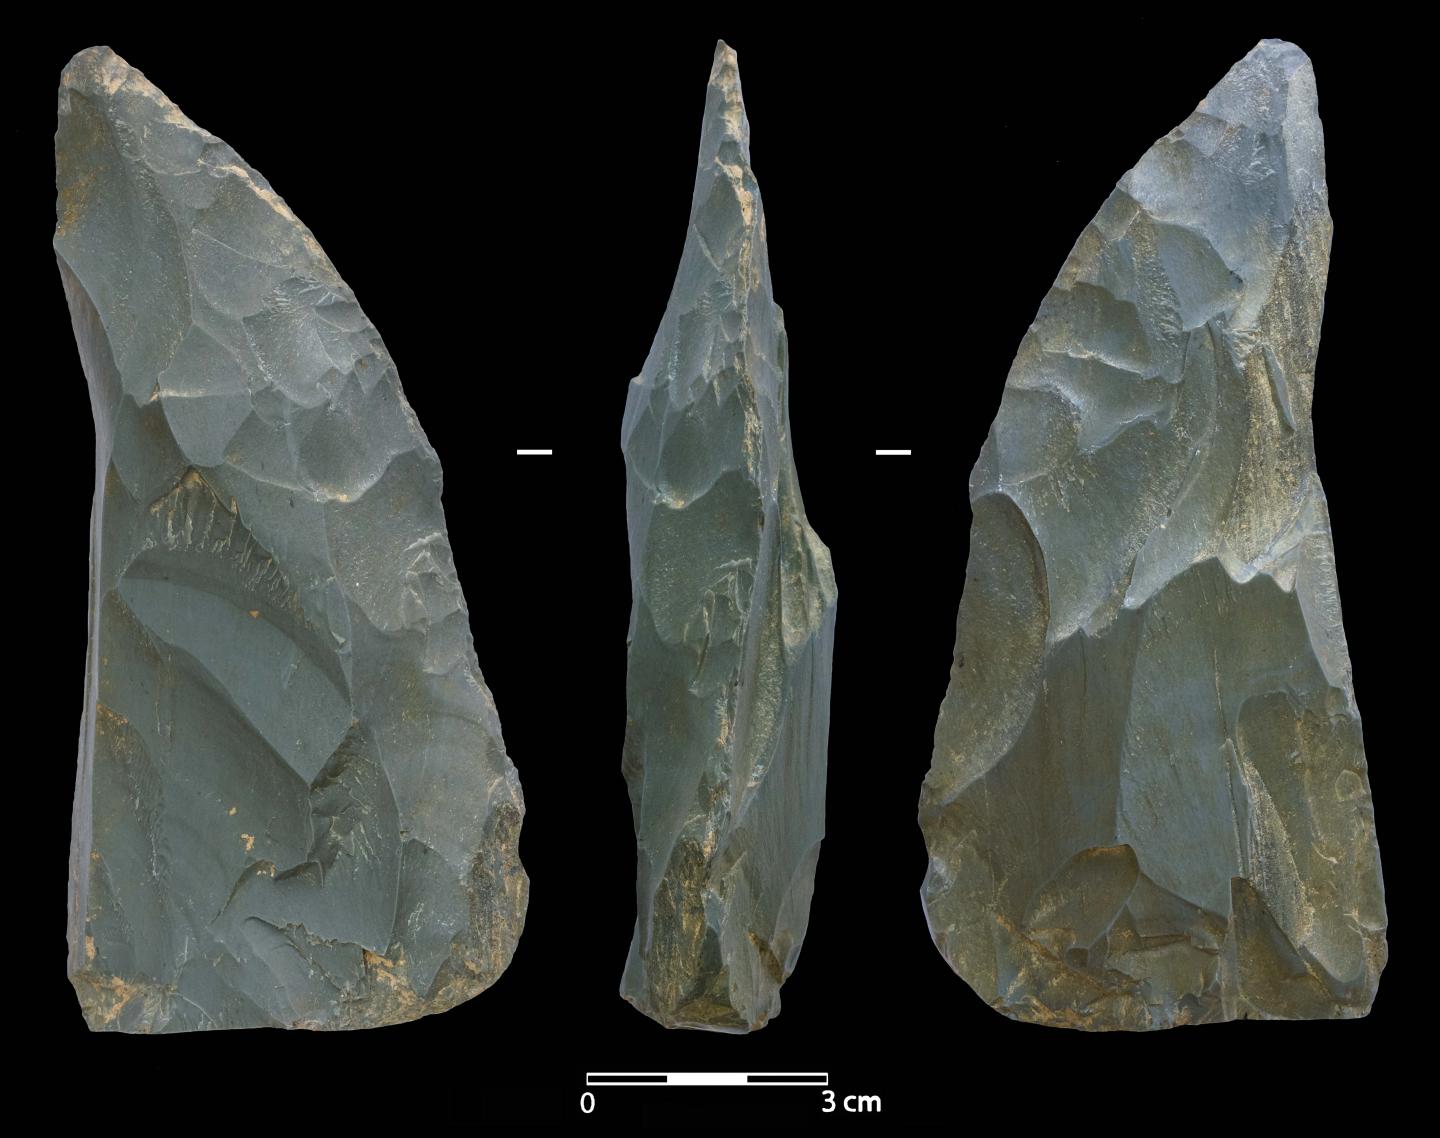 Stone tool used as a meat knife by Neanderthals at Chagyrskaya Cave around 54,000 years ago.